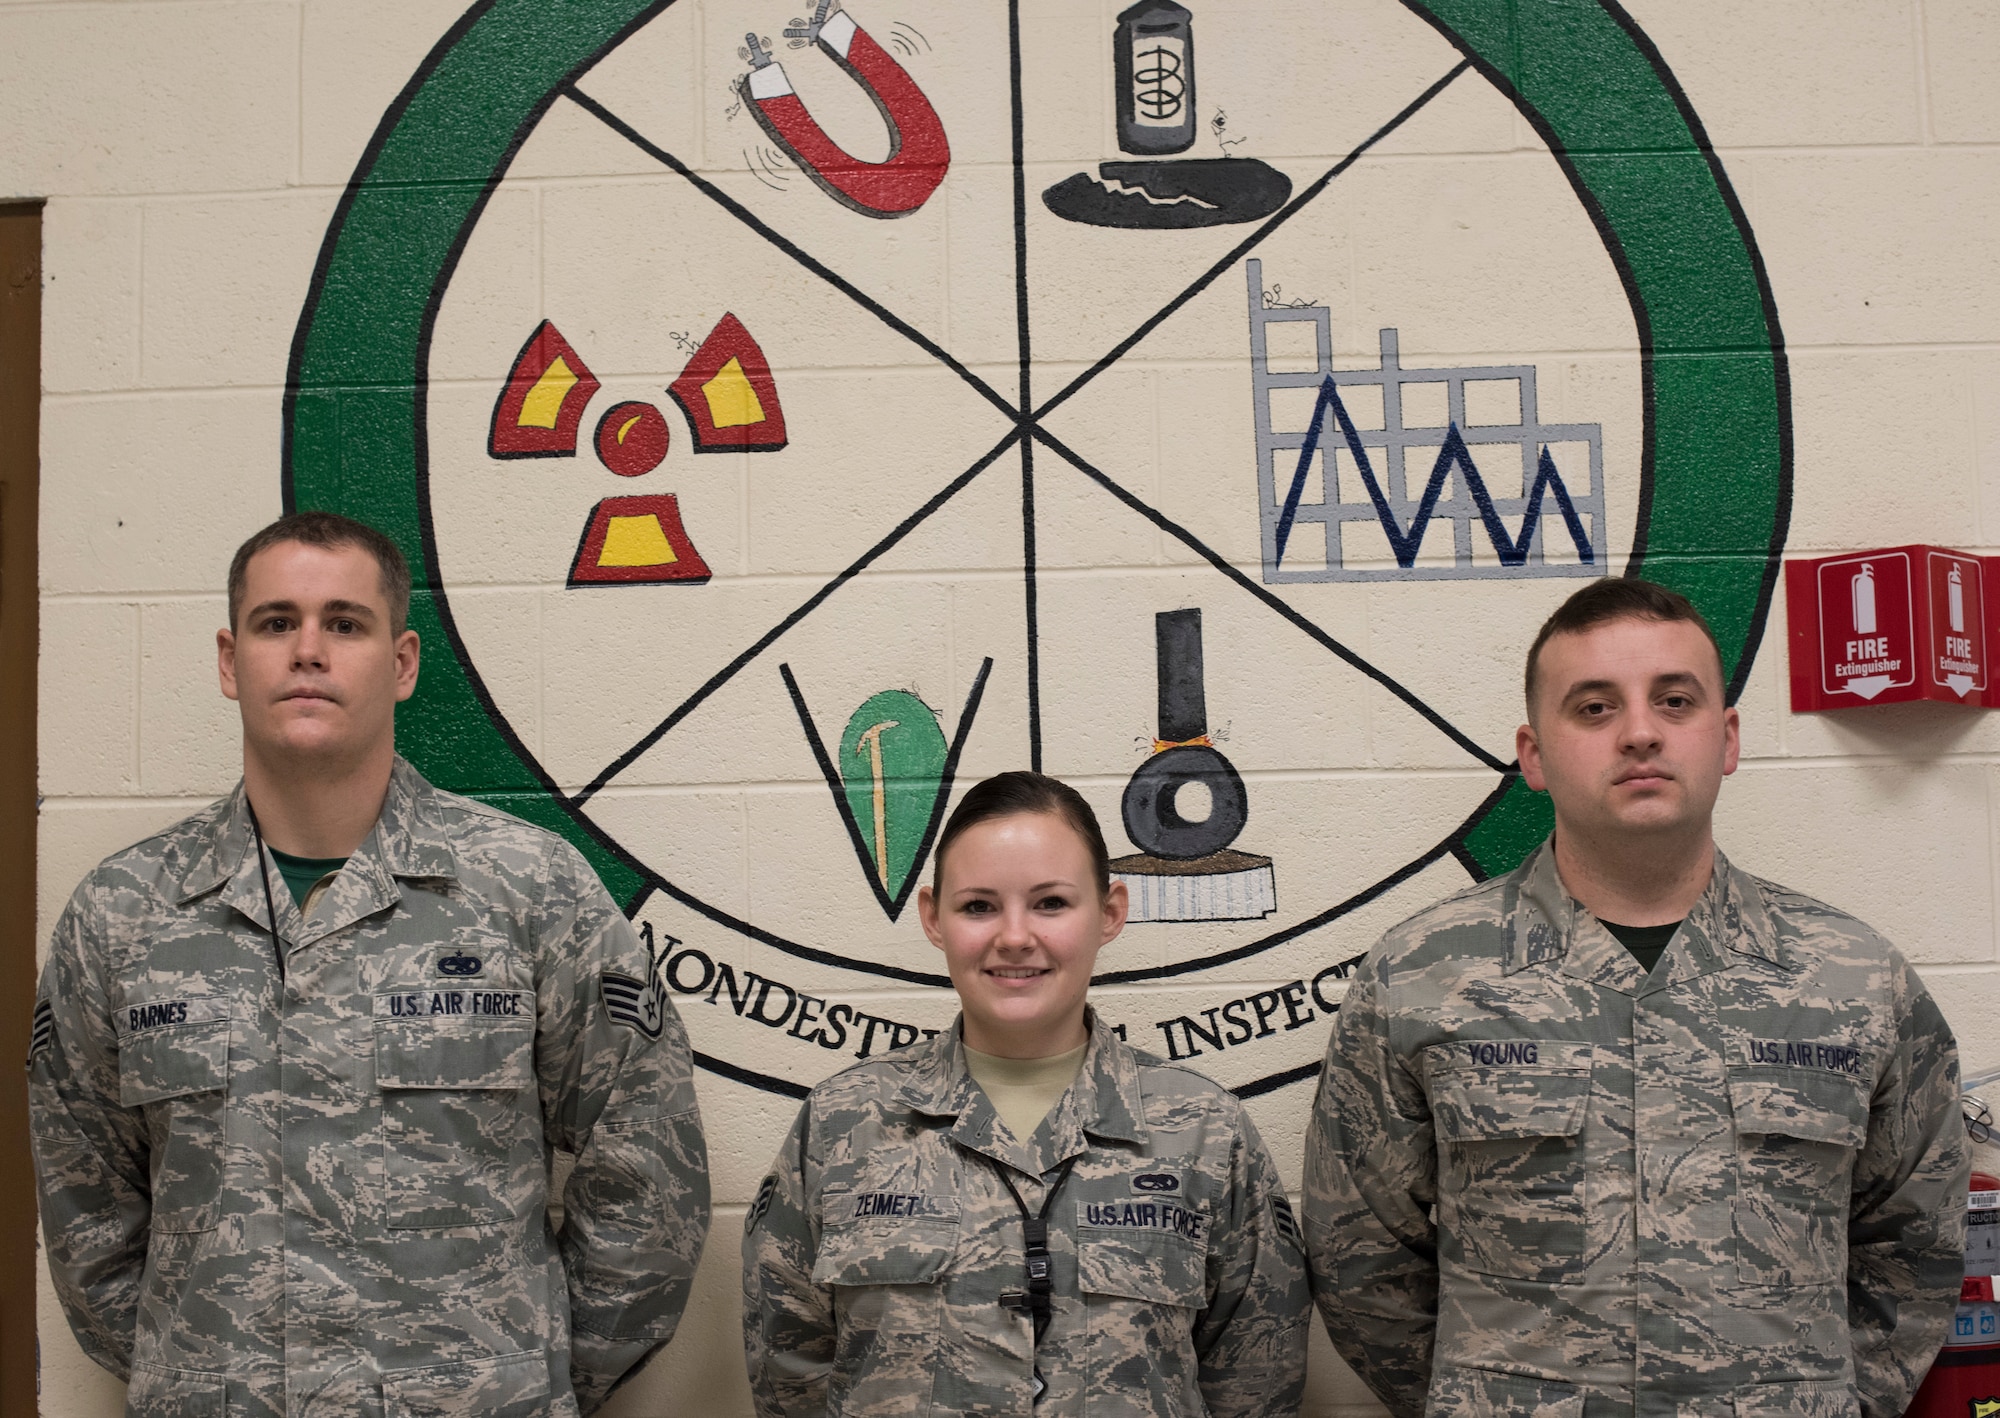 From left to right:  Staff Sgt. Matthew Barnes, 366th Equipment Maintenance Squadron non-destructive inspections craftsman, Senior Airman Violette Zeimet, 366th EMS NDI journeyman, and Senior Airman Phillip Young, 366th EMS NDI journeyman, pose for a photo in front of their occupational crest Jan. 15, 2016, at Mountain Home Air Force Base, Idaho.  NDI personnel must be proficient in identifying metals, metals' flaws and have a strong understanding of radiological safety.(U.S. Air Force photo by Senior Airman Jeremy L. Mosier/Released)